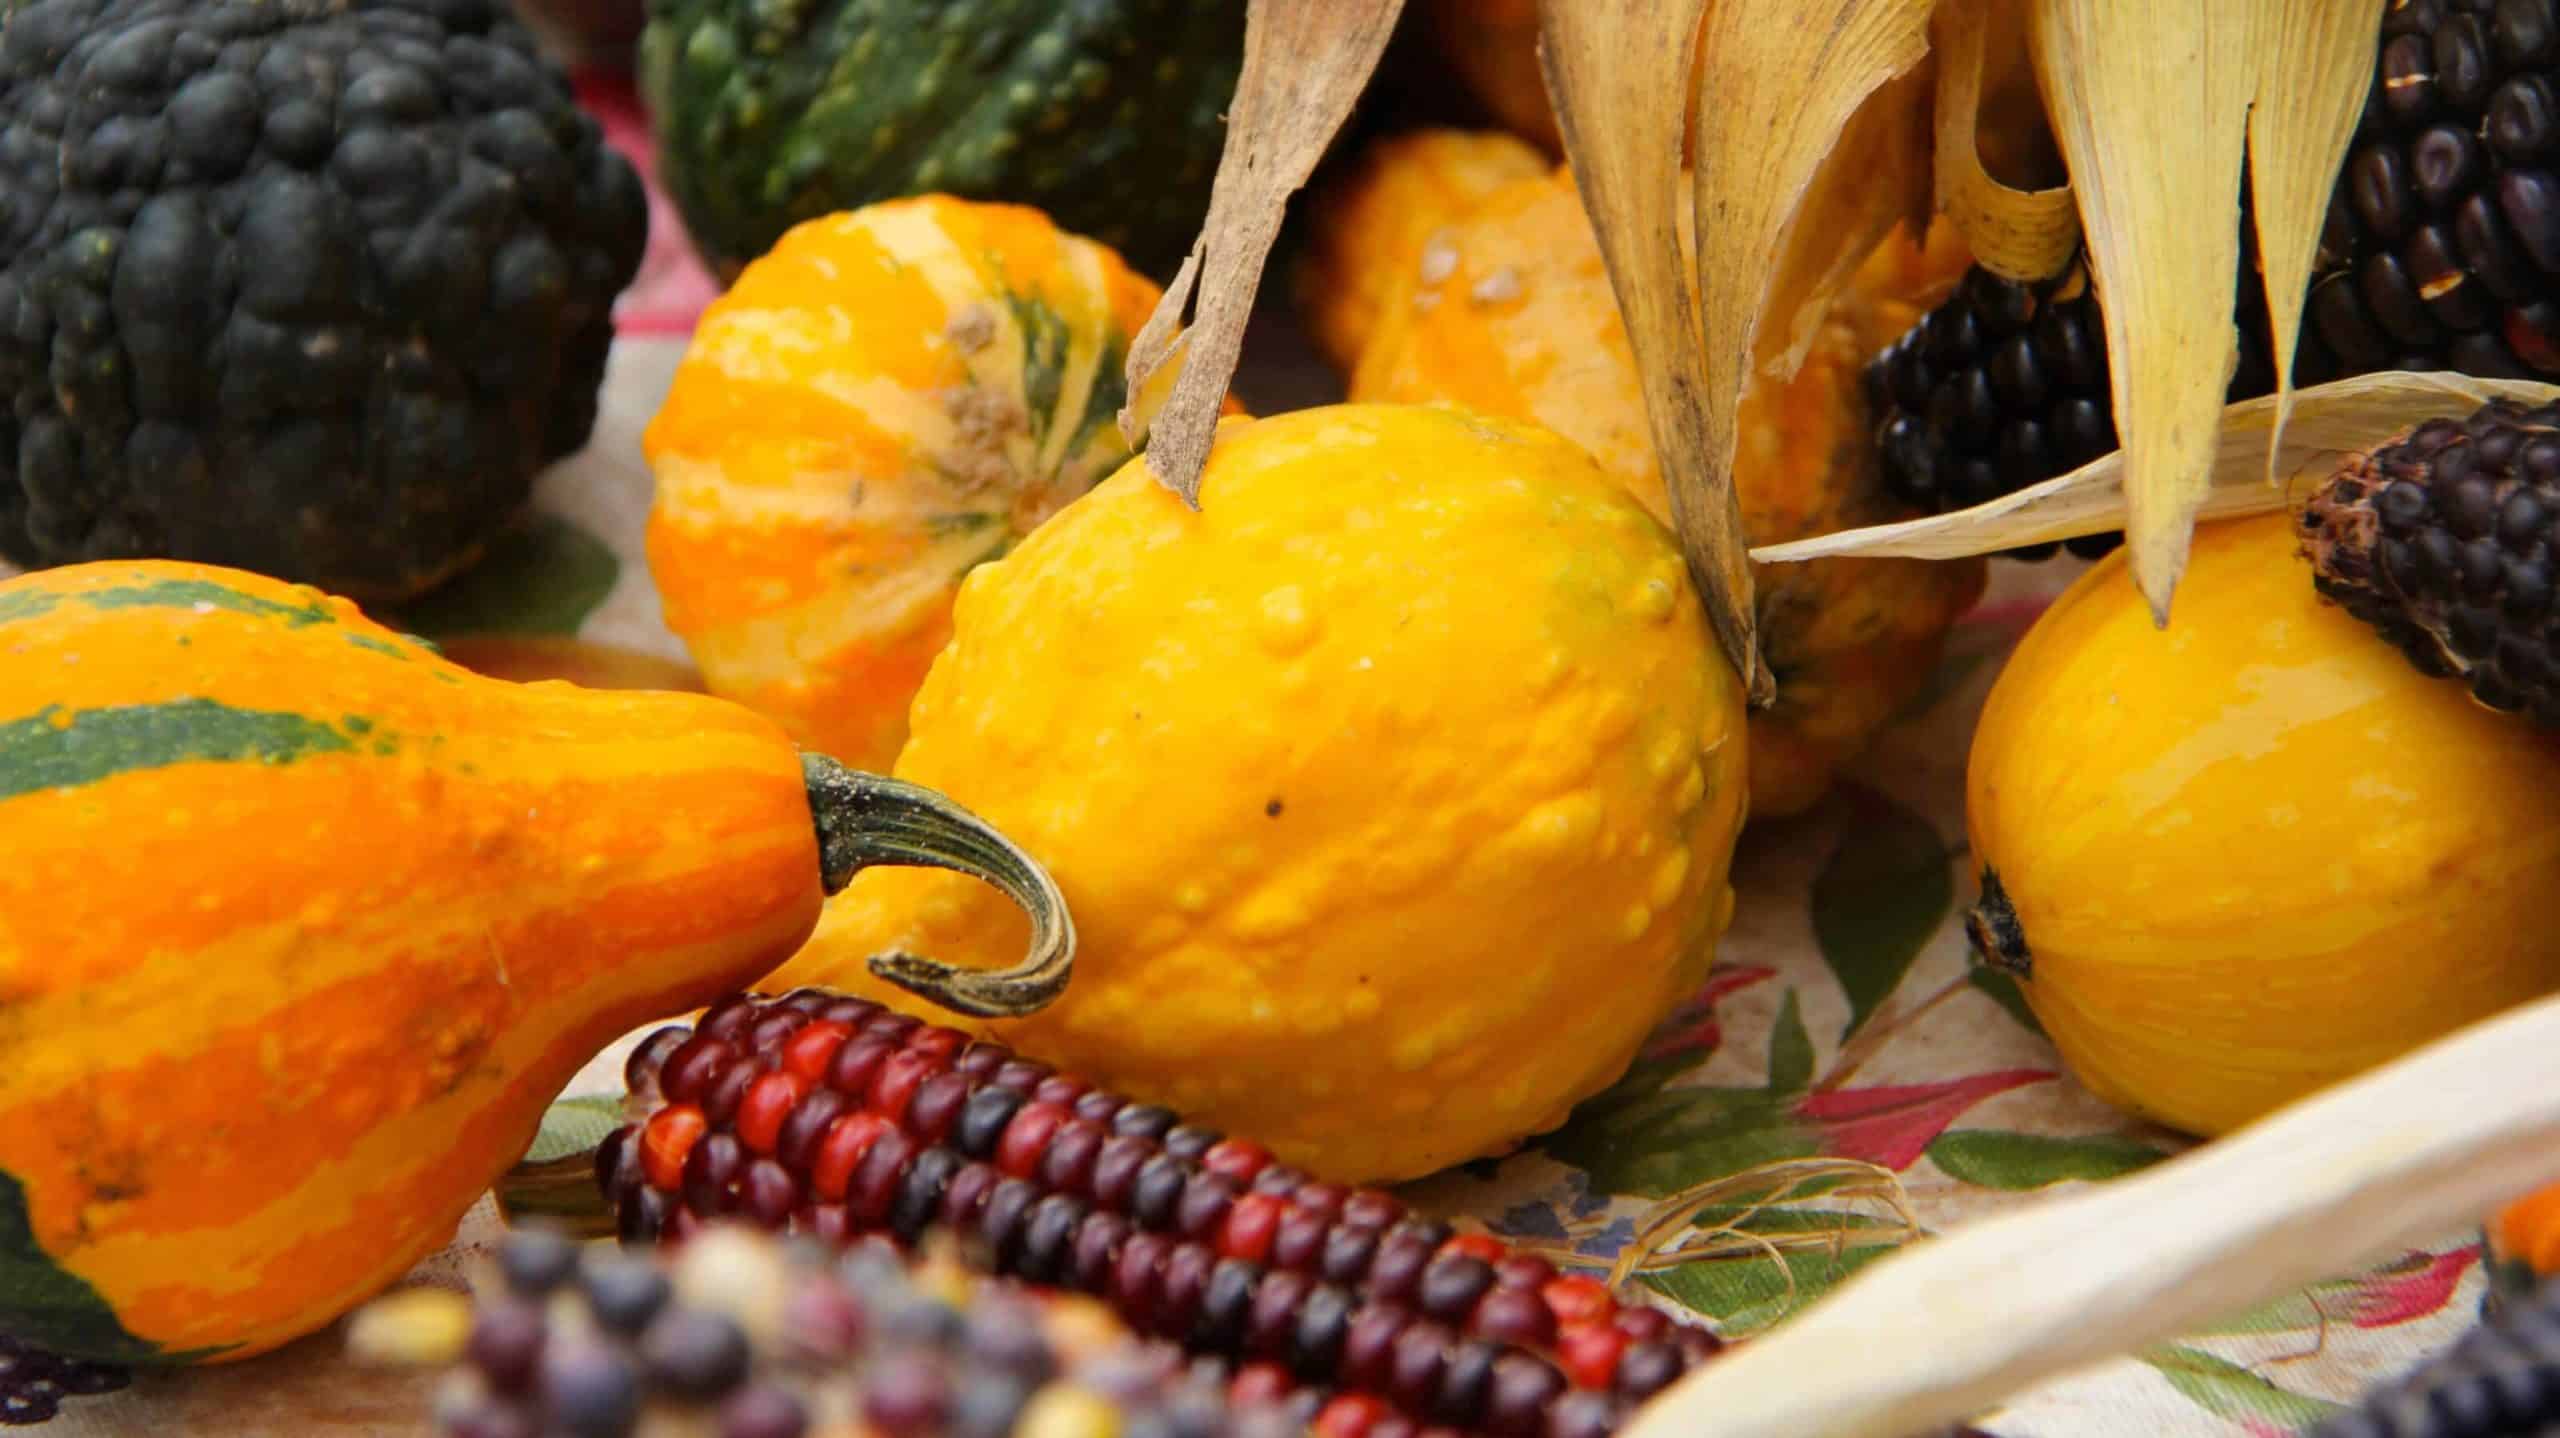 Berkshire squashes, gourds and corn show bright colors at a farmers market.